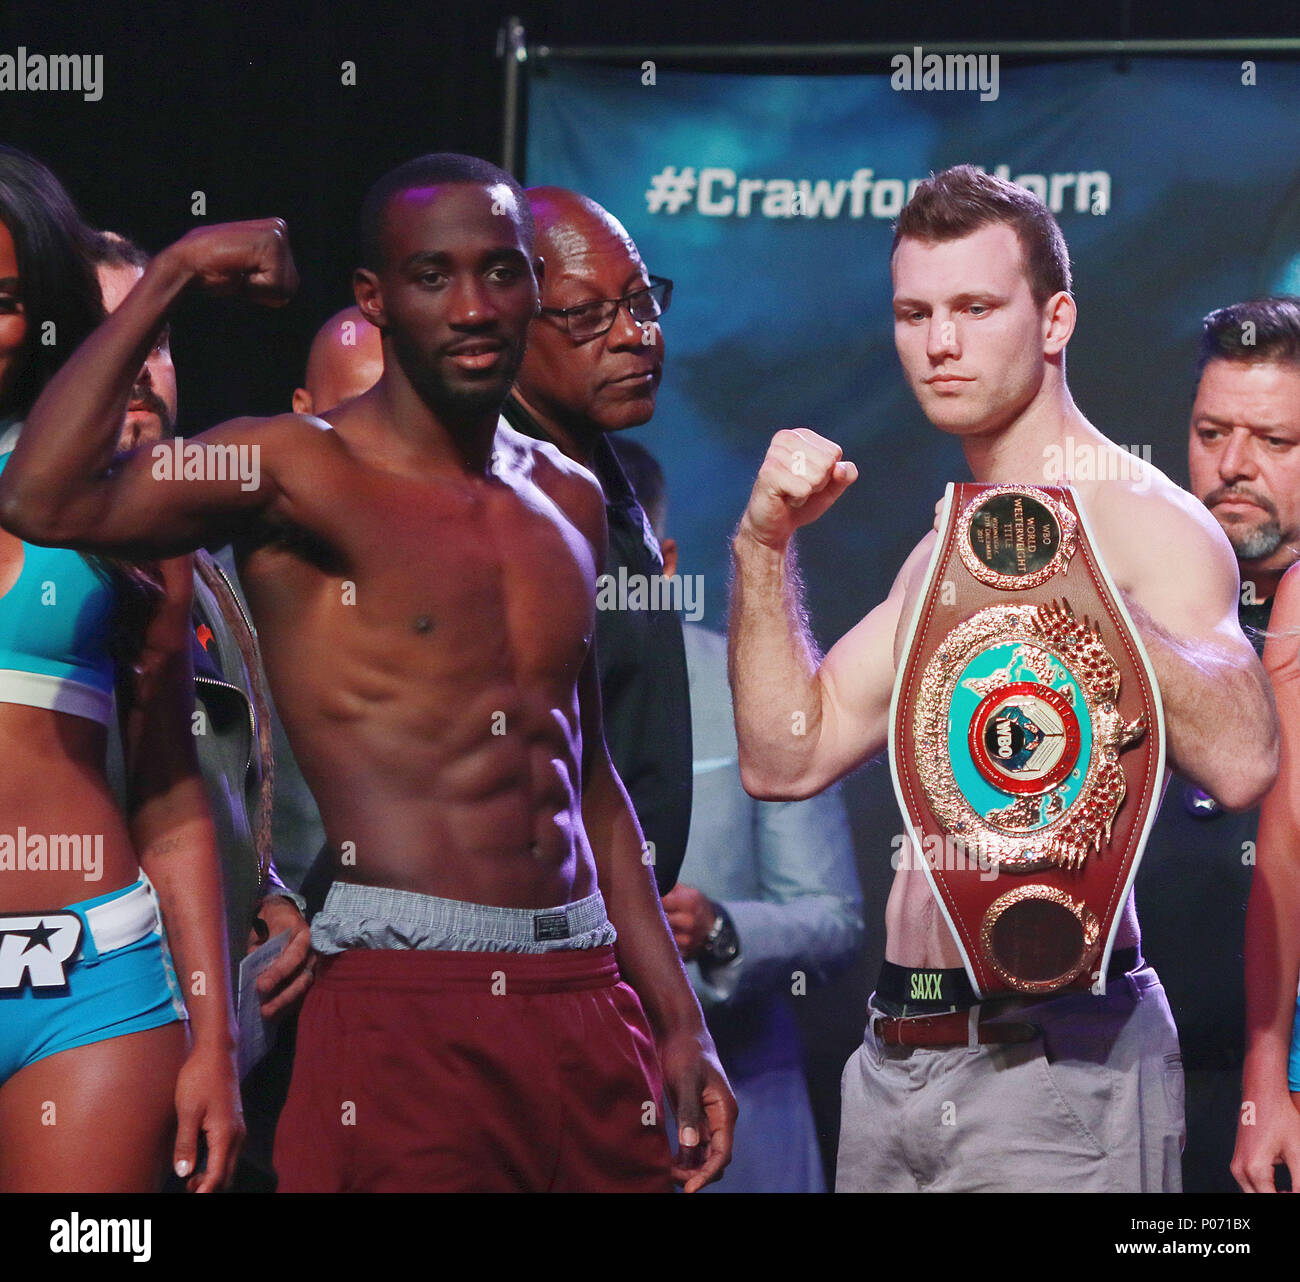 Våbenstilstand Kemiker Omkostningsprocent Las Vegas, Nevada, USA. 8th June, 2018. WBO Welterweight Boxing Champion  Jeff Horn and undisputed Junior Welterweight Champion Terrence Crawford  square off at the weighin ceremony on June 8, 2018 for their